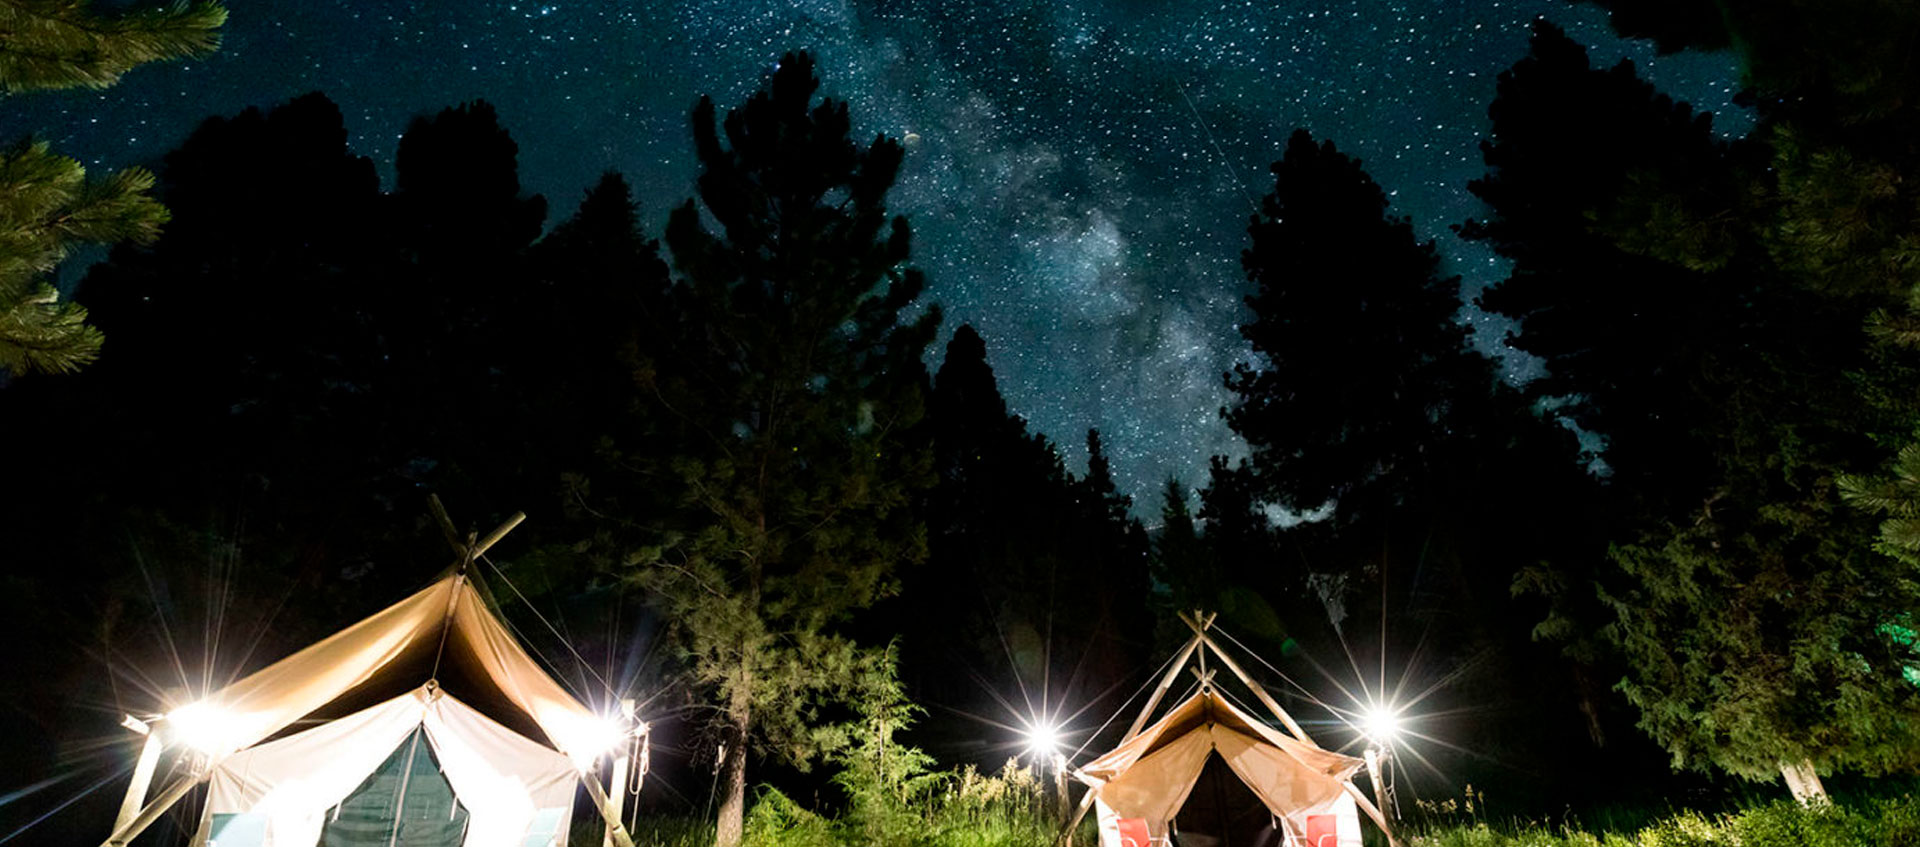 Tent Cabins under the night sky at the North Fork Crossing Lodge in Montana